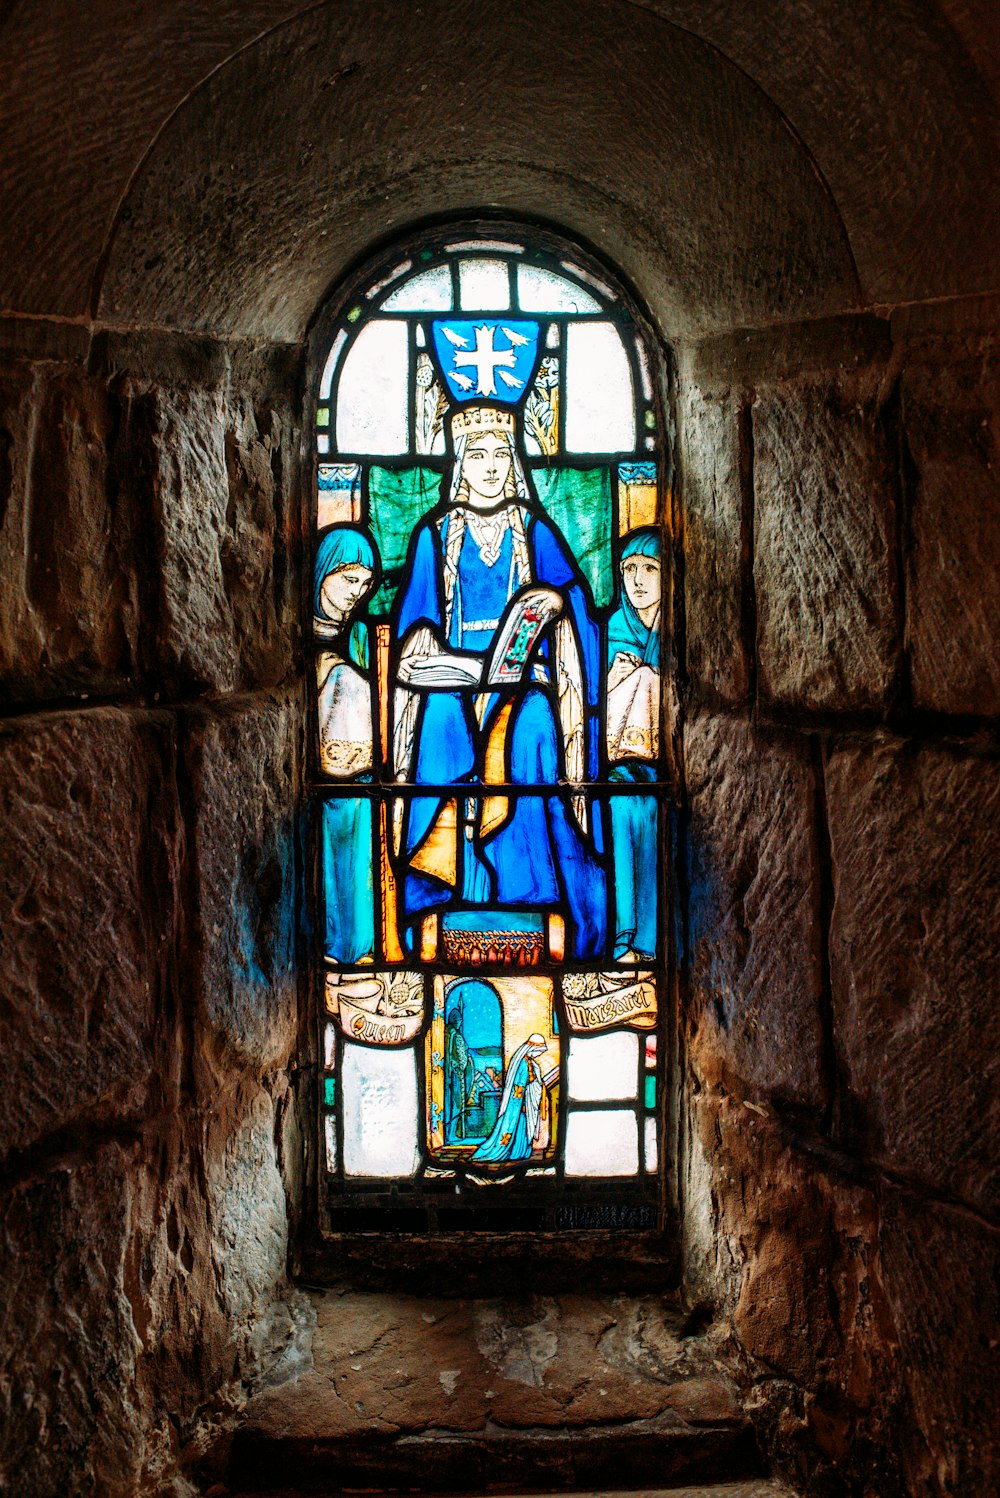 a stained glass window in a stone wall